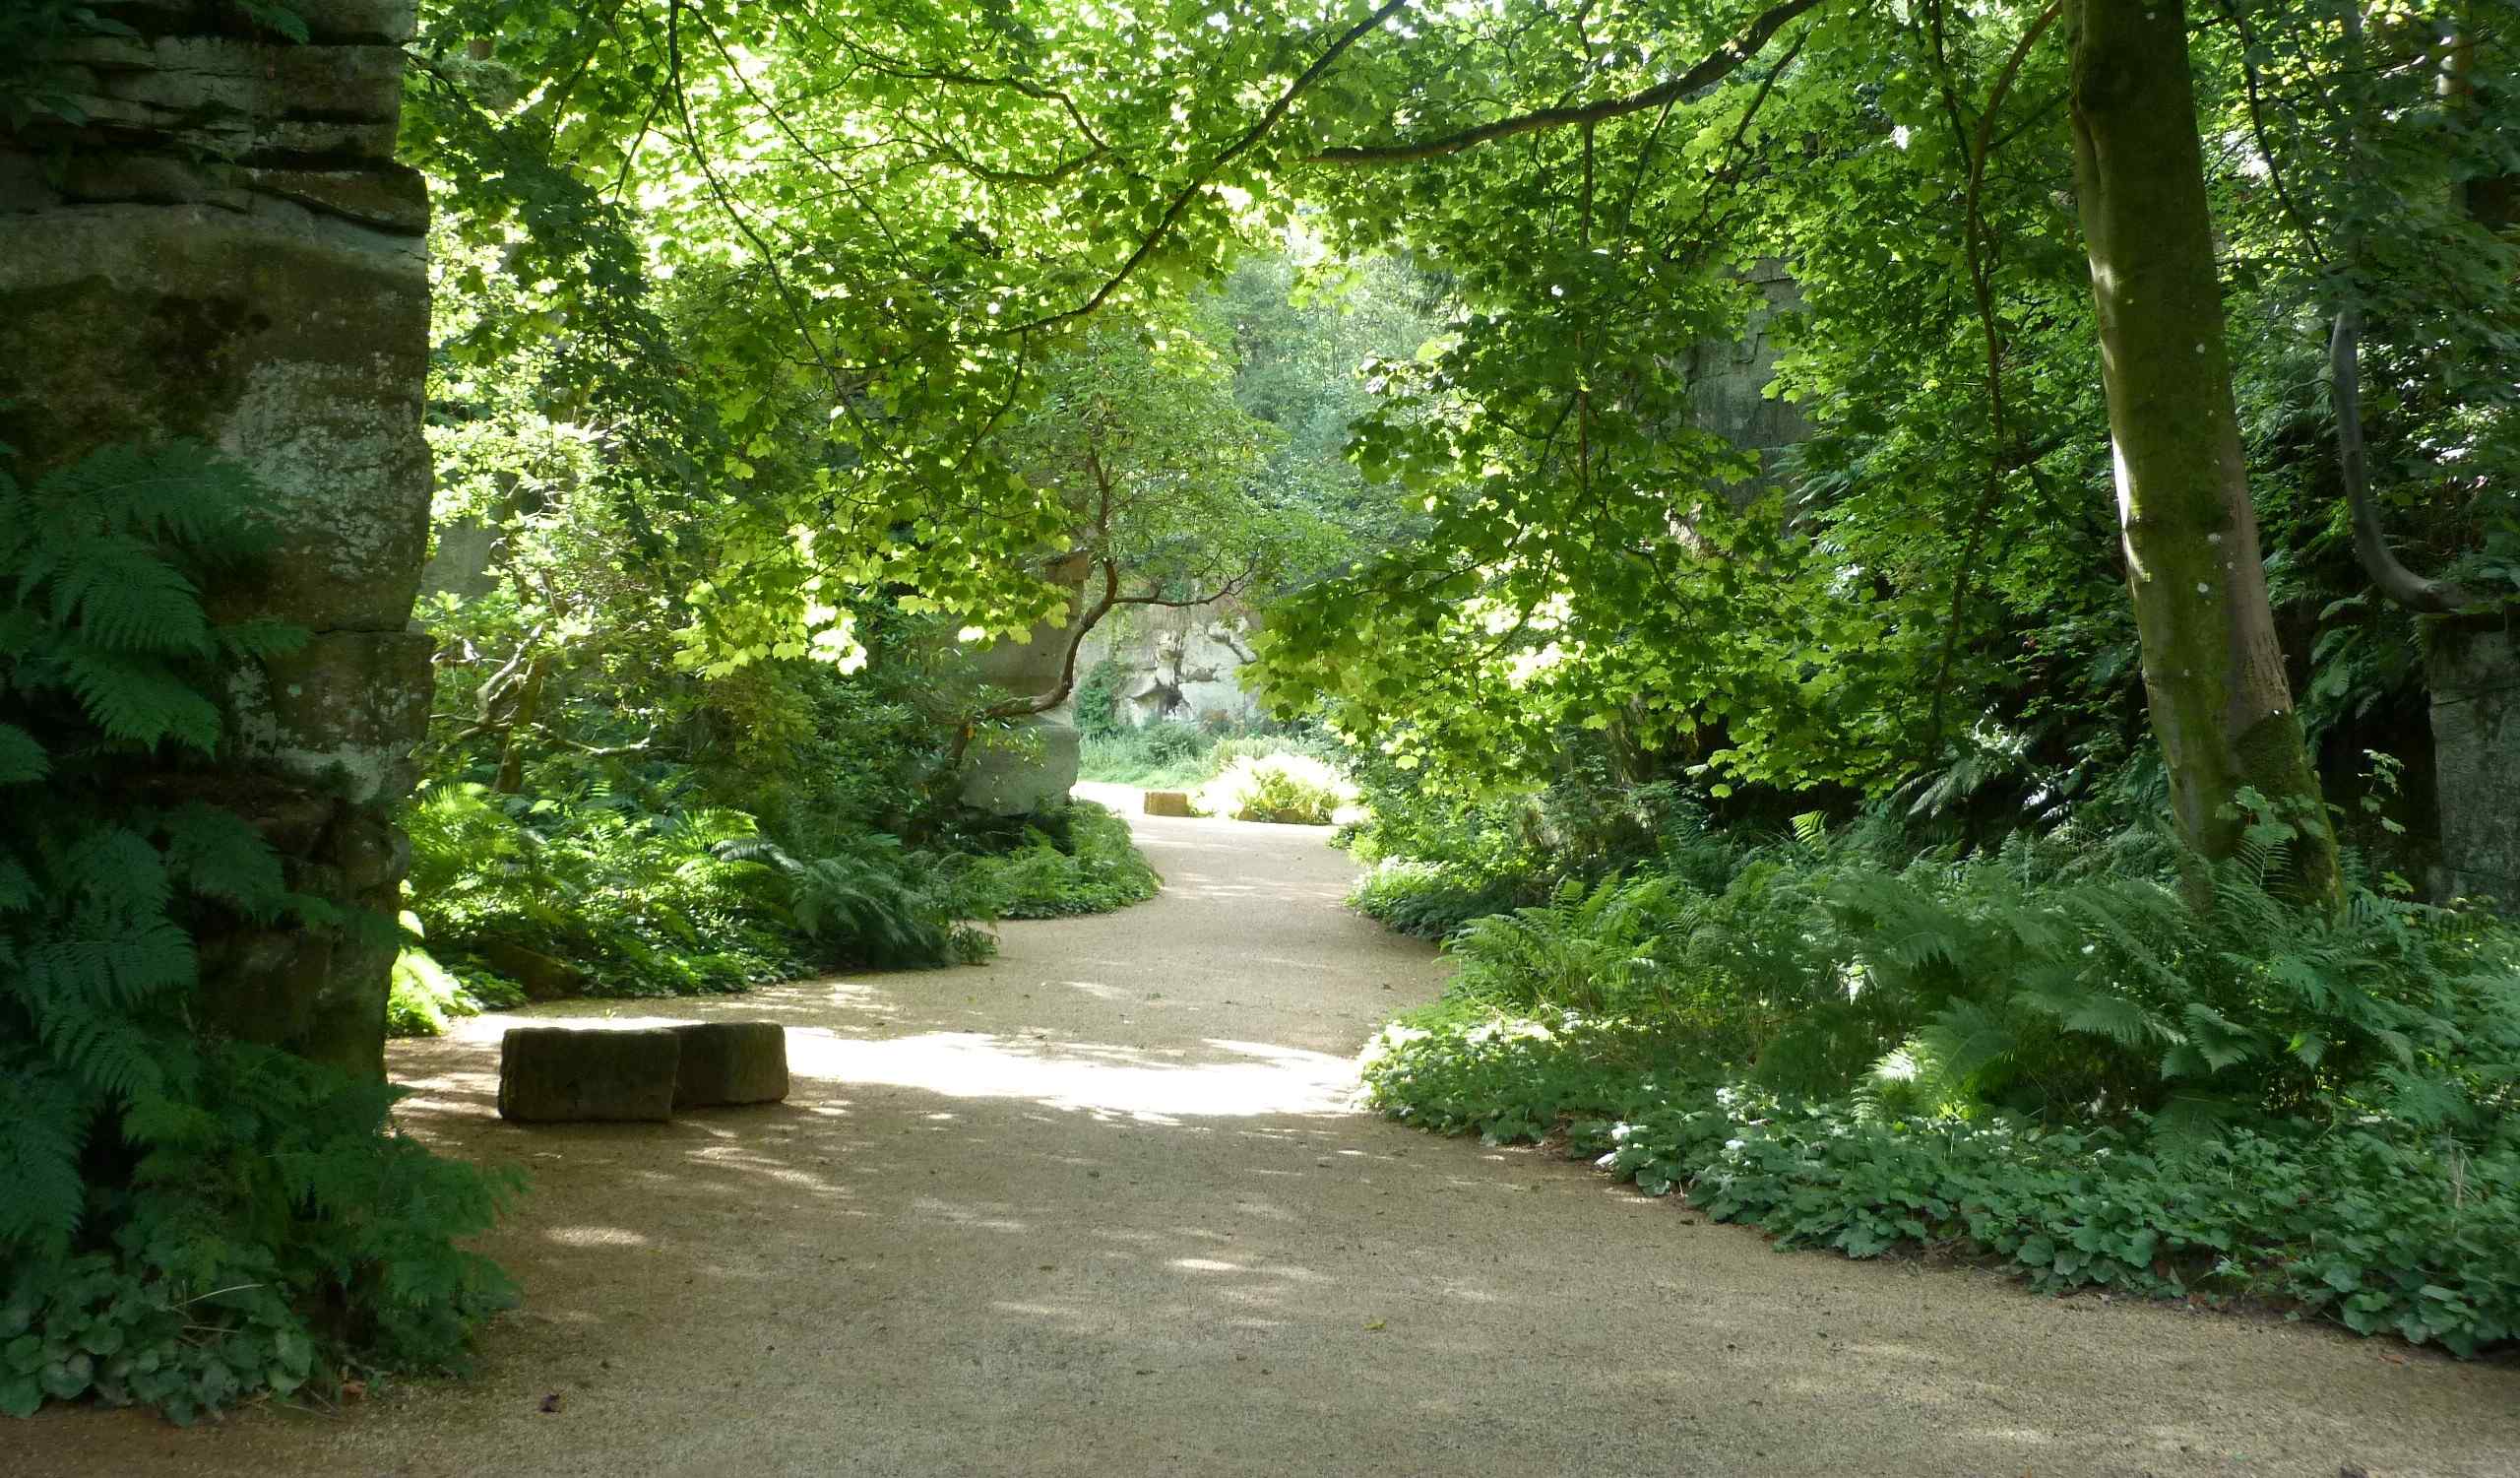 Winding path shaded by trees